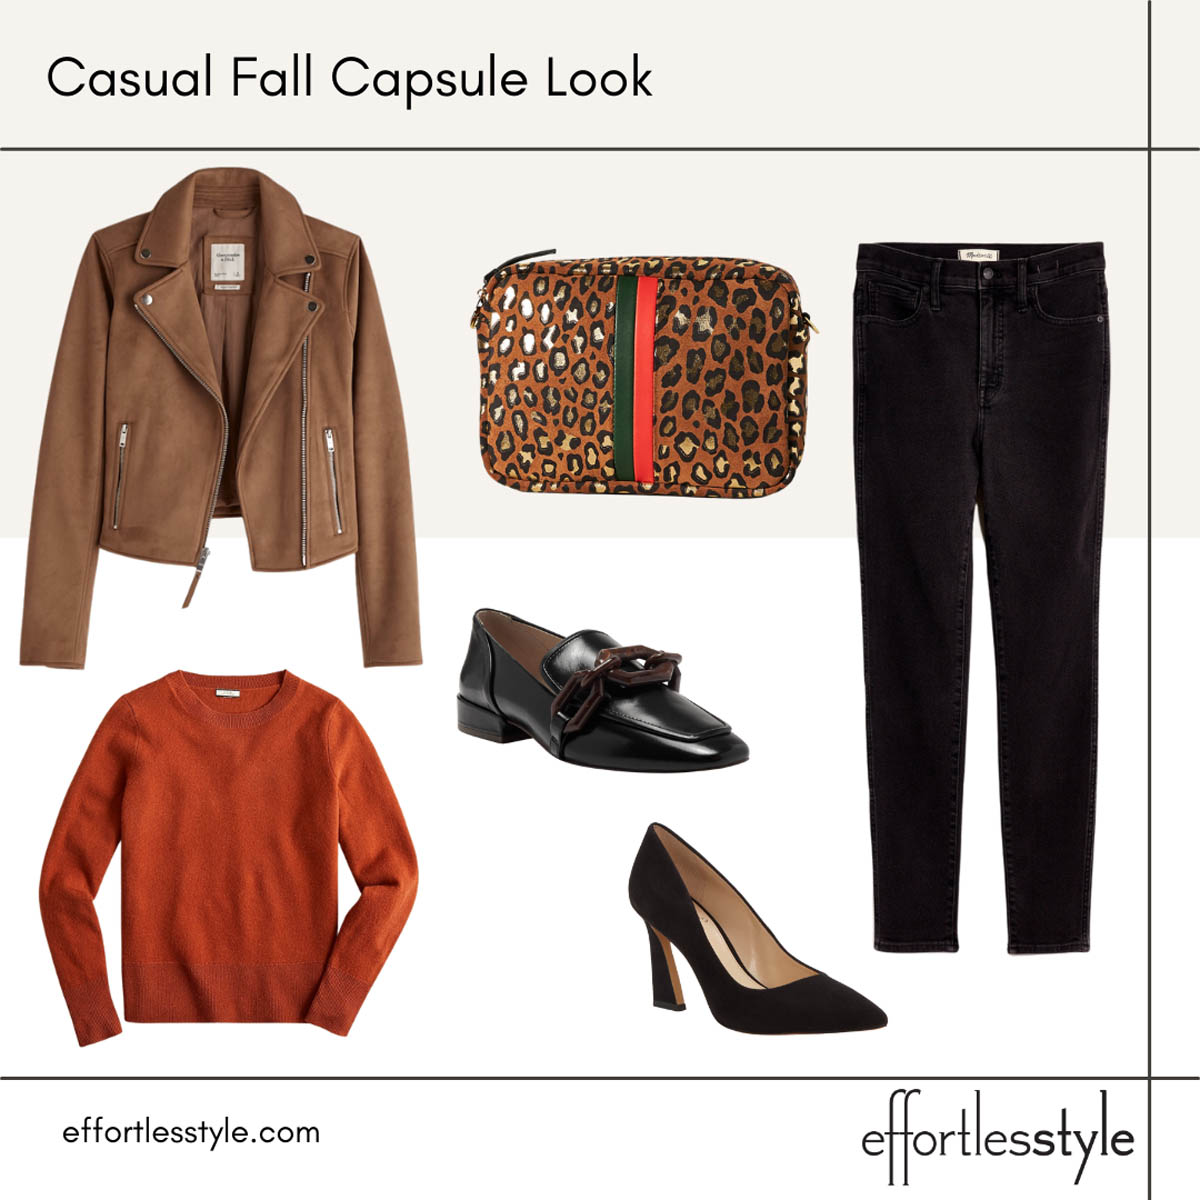 Fall Capsule Wardrobe Looks Suede Moto Jacket and Black Jeans Outfit